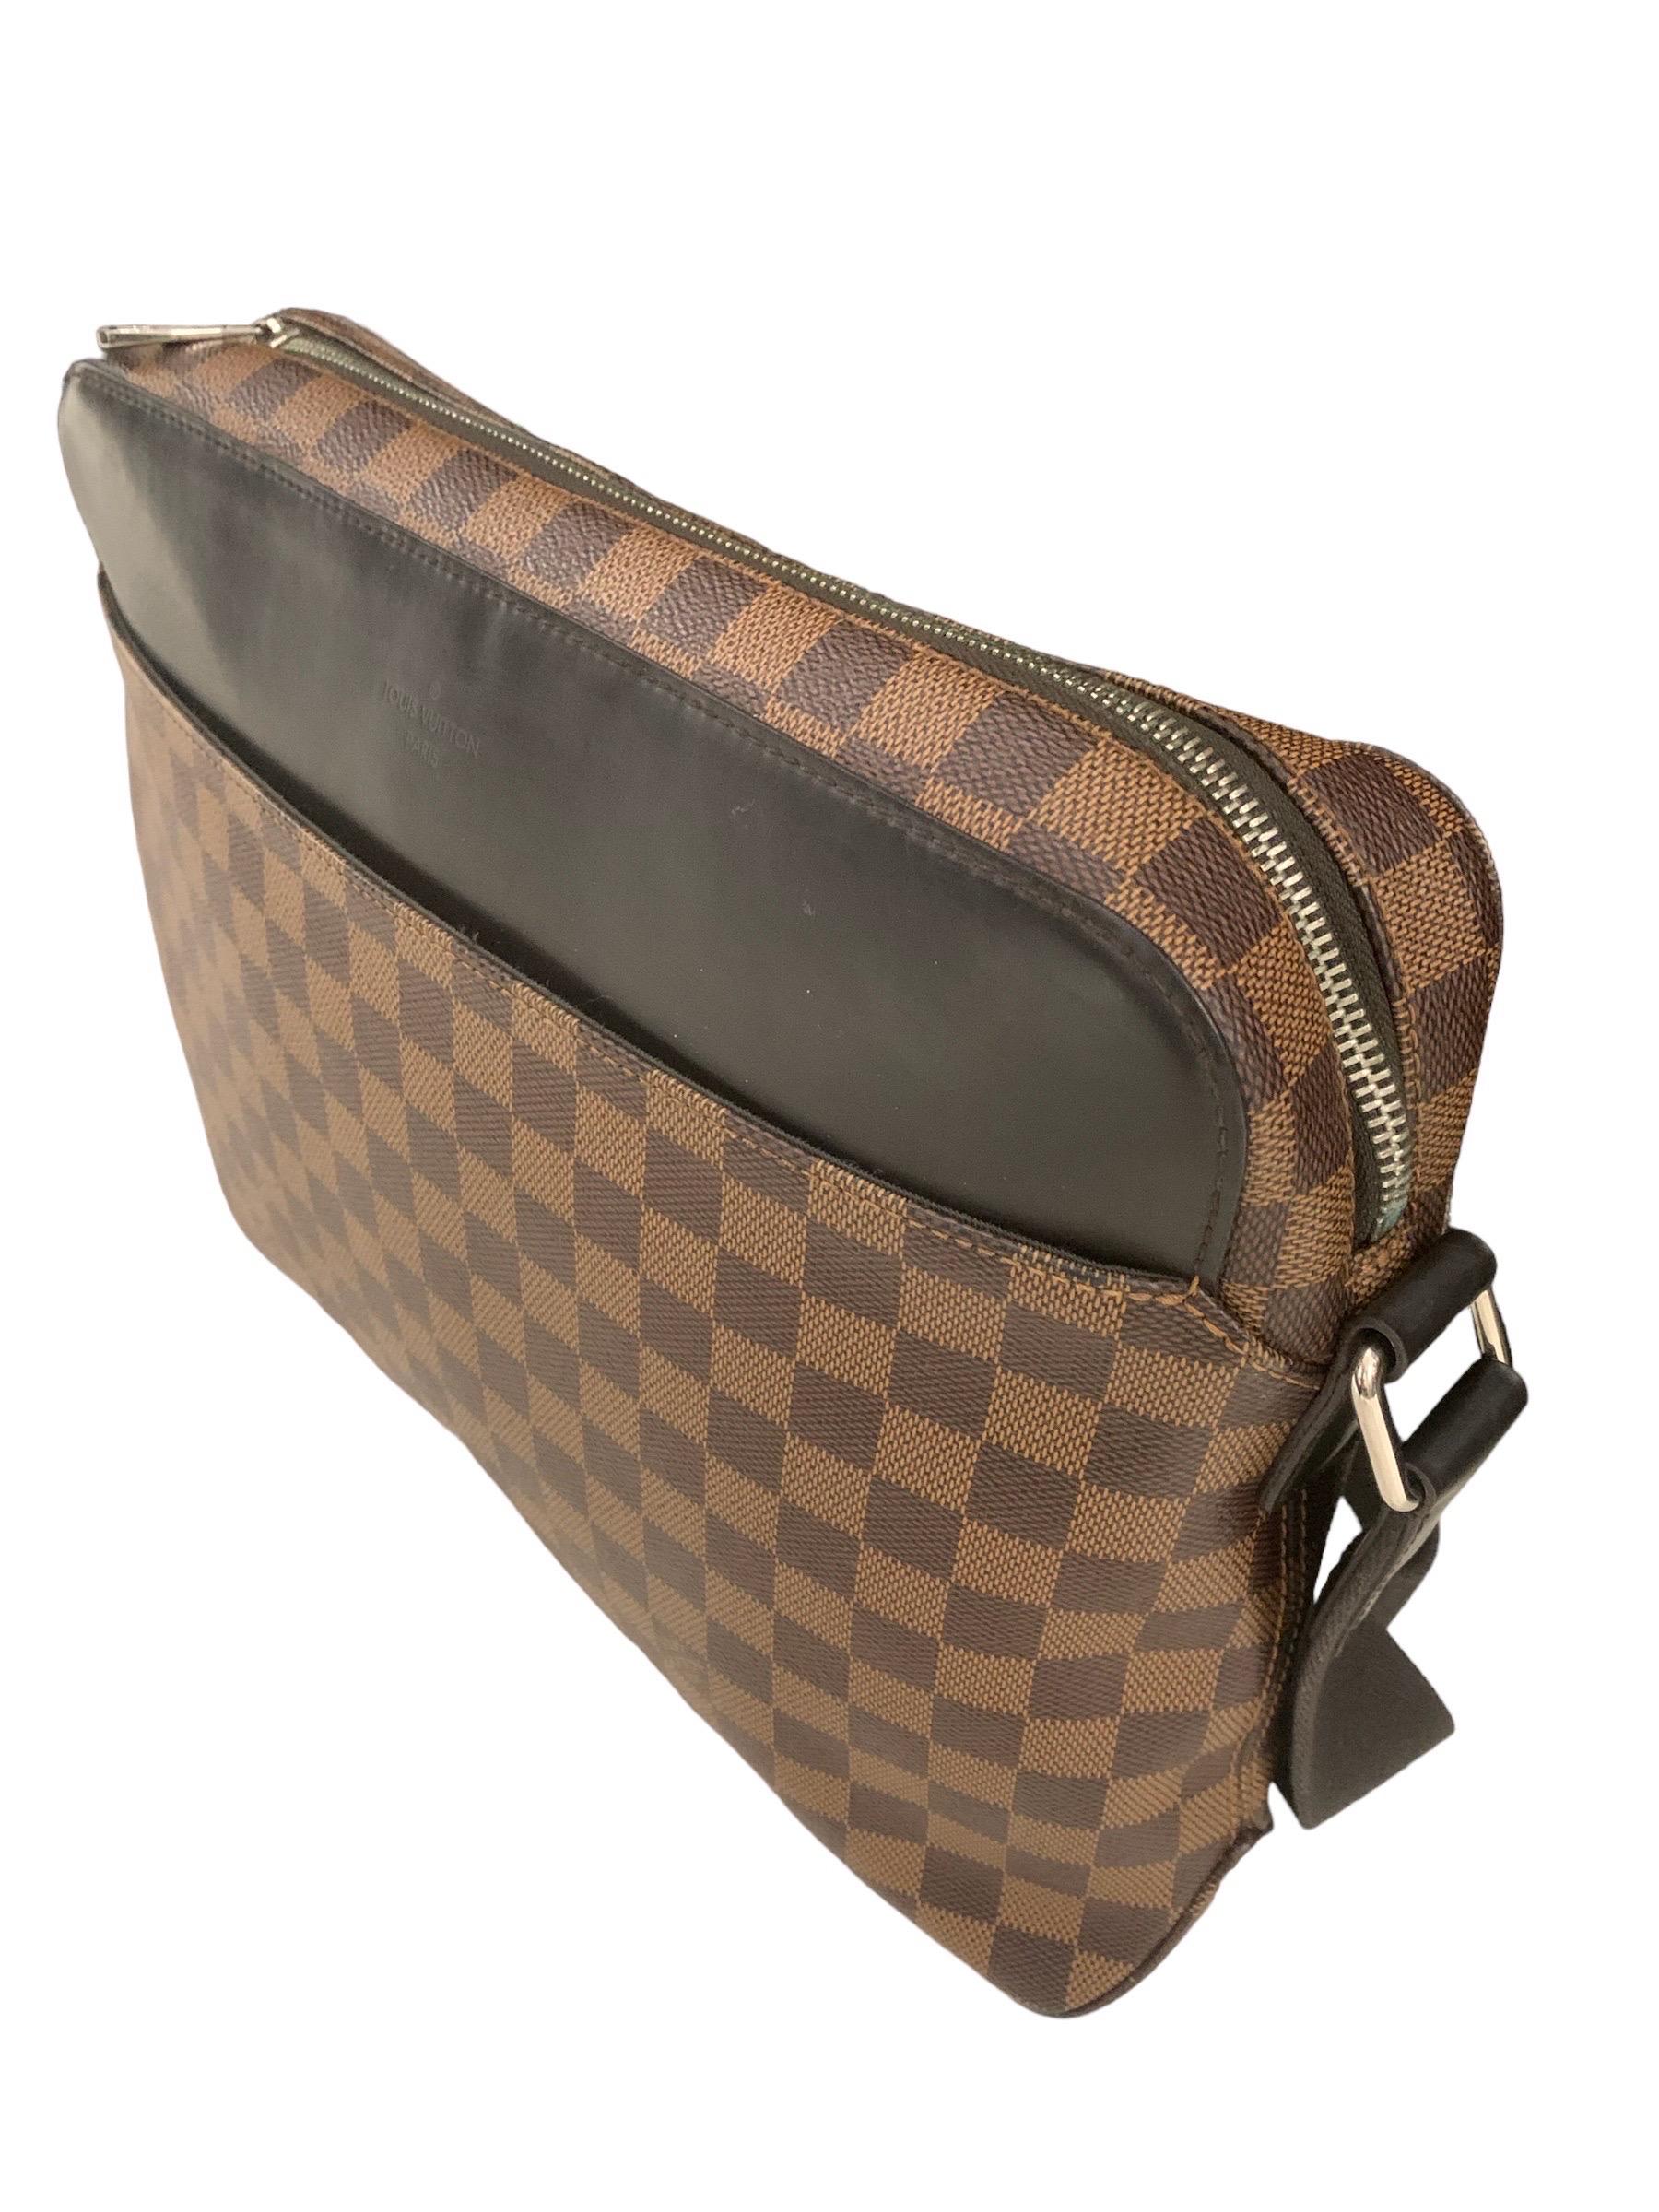 Tracolla Louis Vuitton Jake Messanger Damier Ebene In Good Condition For Sale In Torre Del Greco, IT